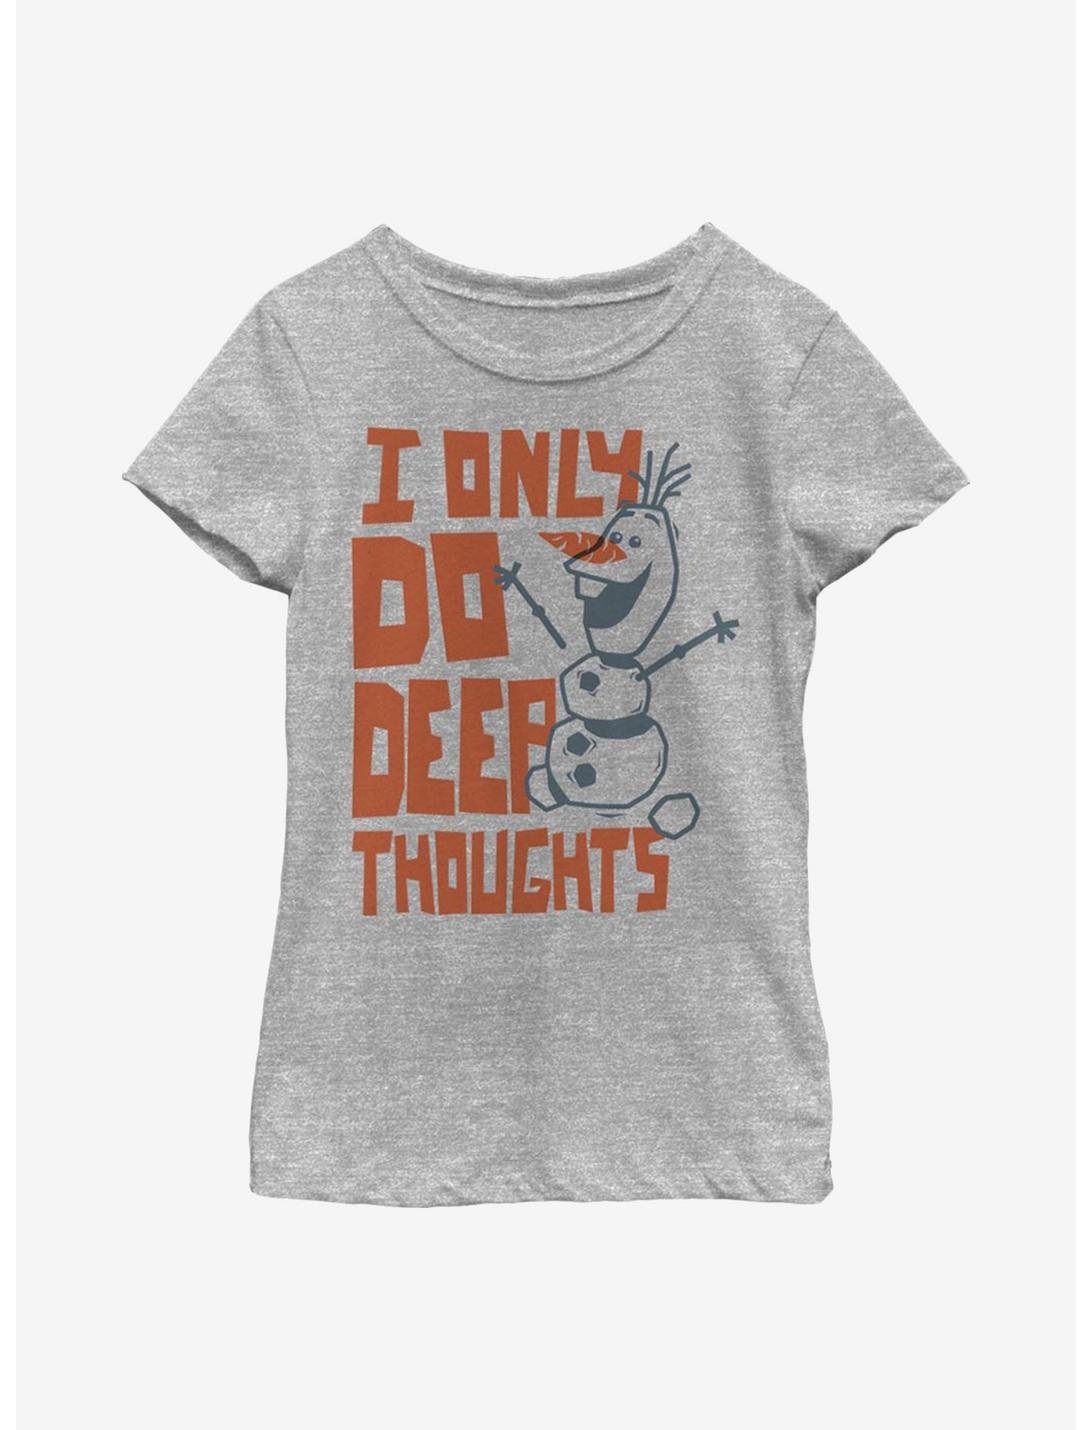 Disney Frozen 2 Deep Thoughts Youth Girls T-Shirt, ATH HTR, hi-res